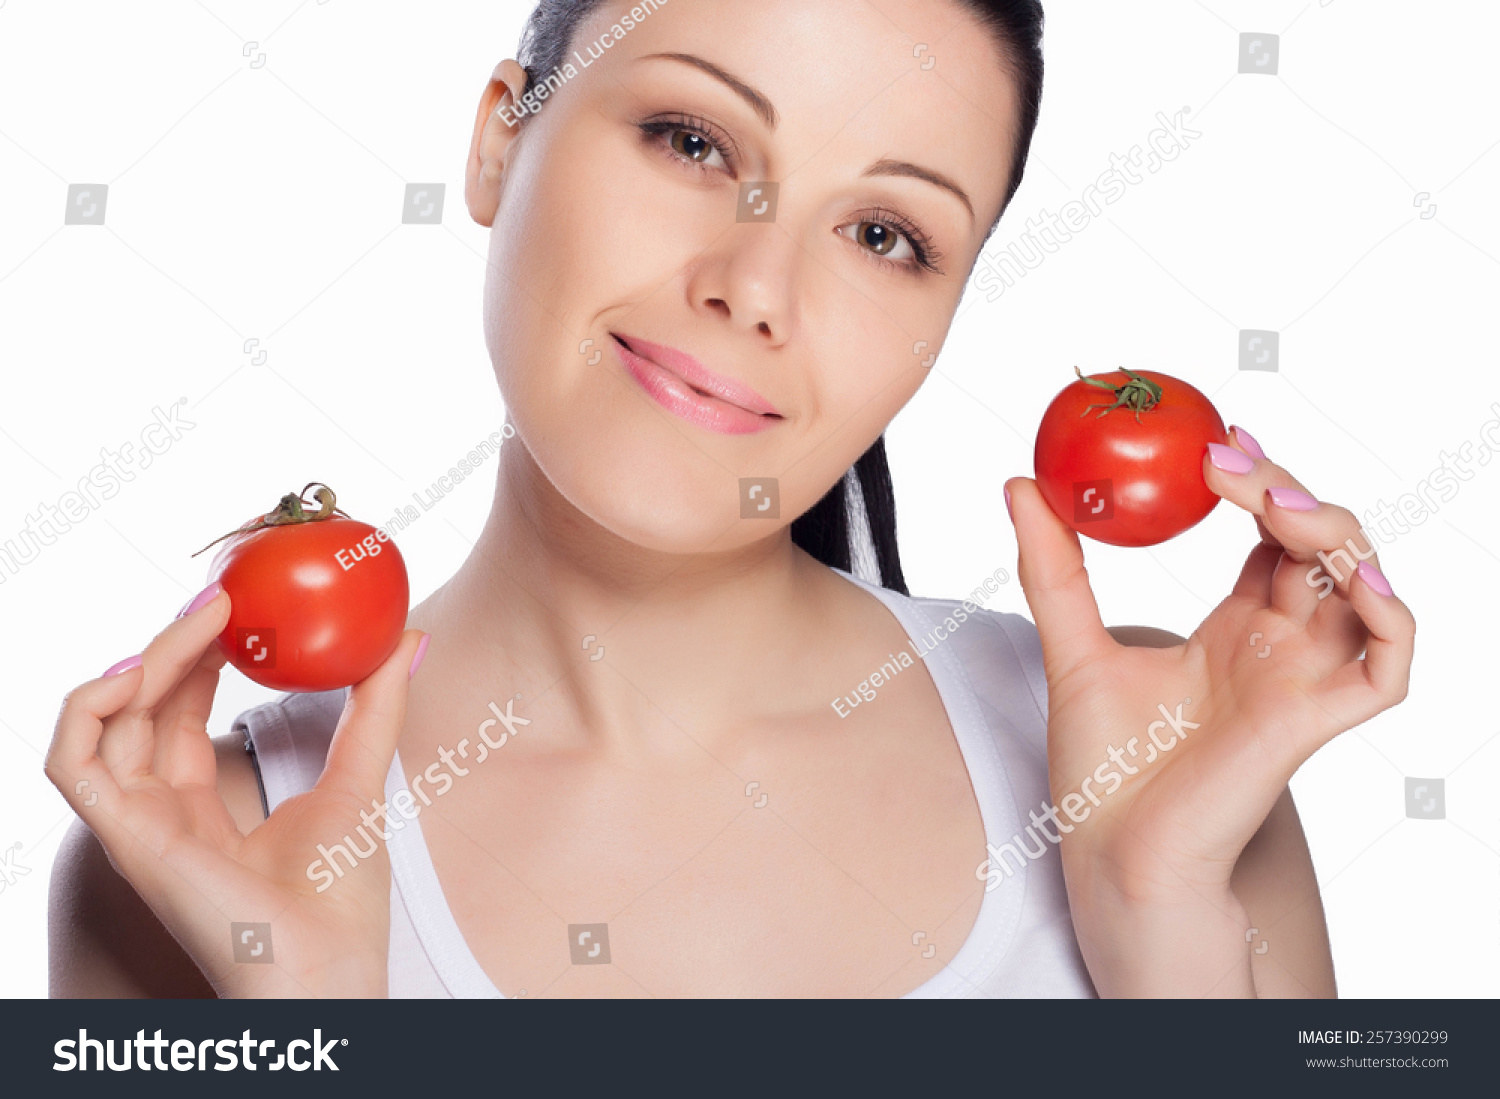 Beautiful close-up portrait of young woman with tomato. Healthy food and vegetables concept. Skin care and beauty. Vitamins and minerals. #257390299